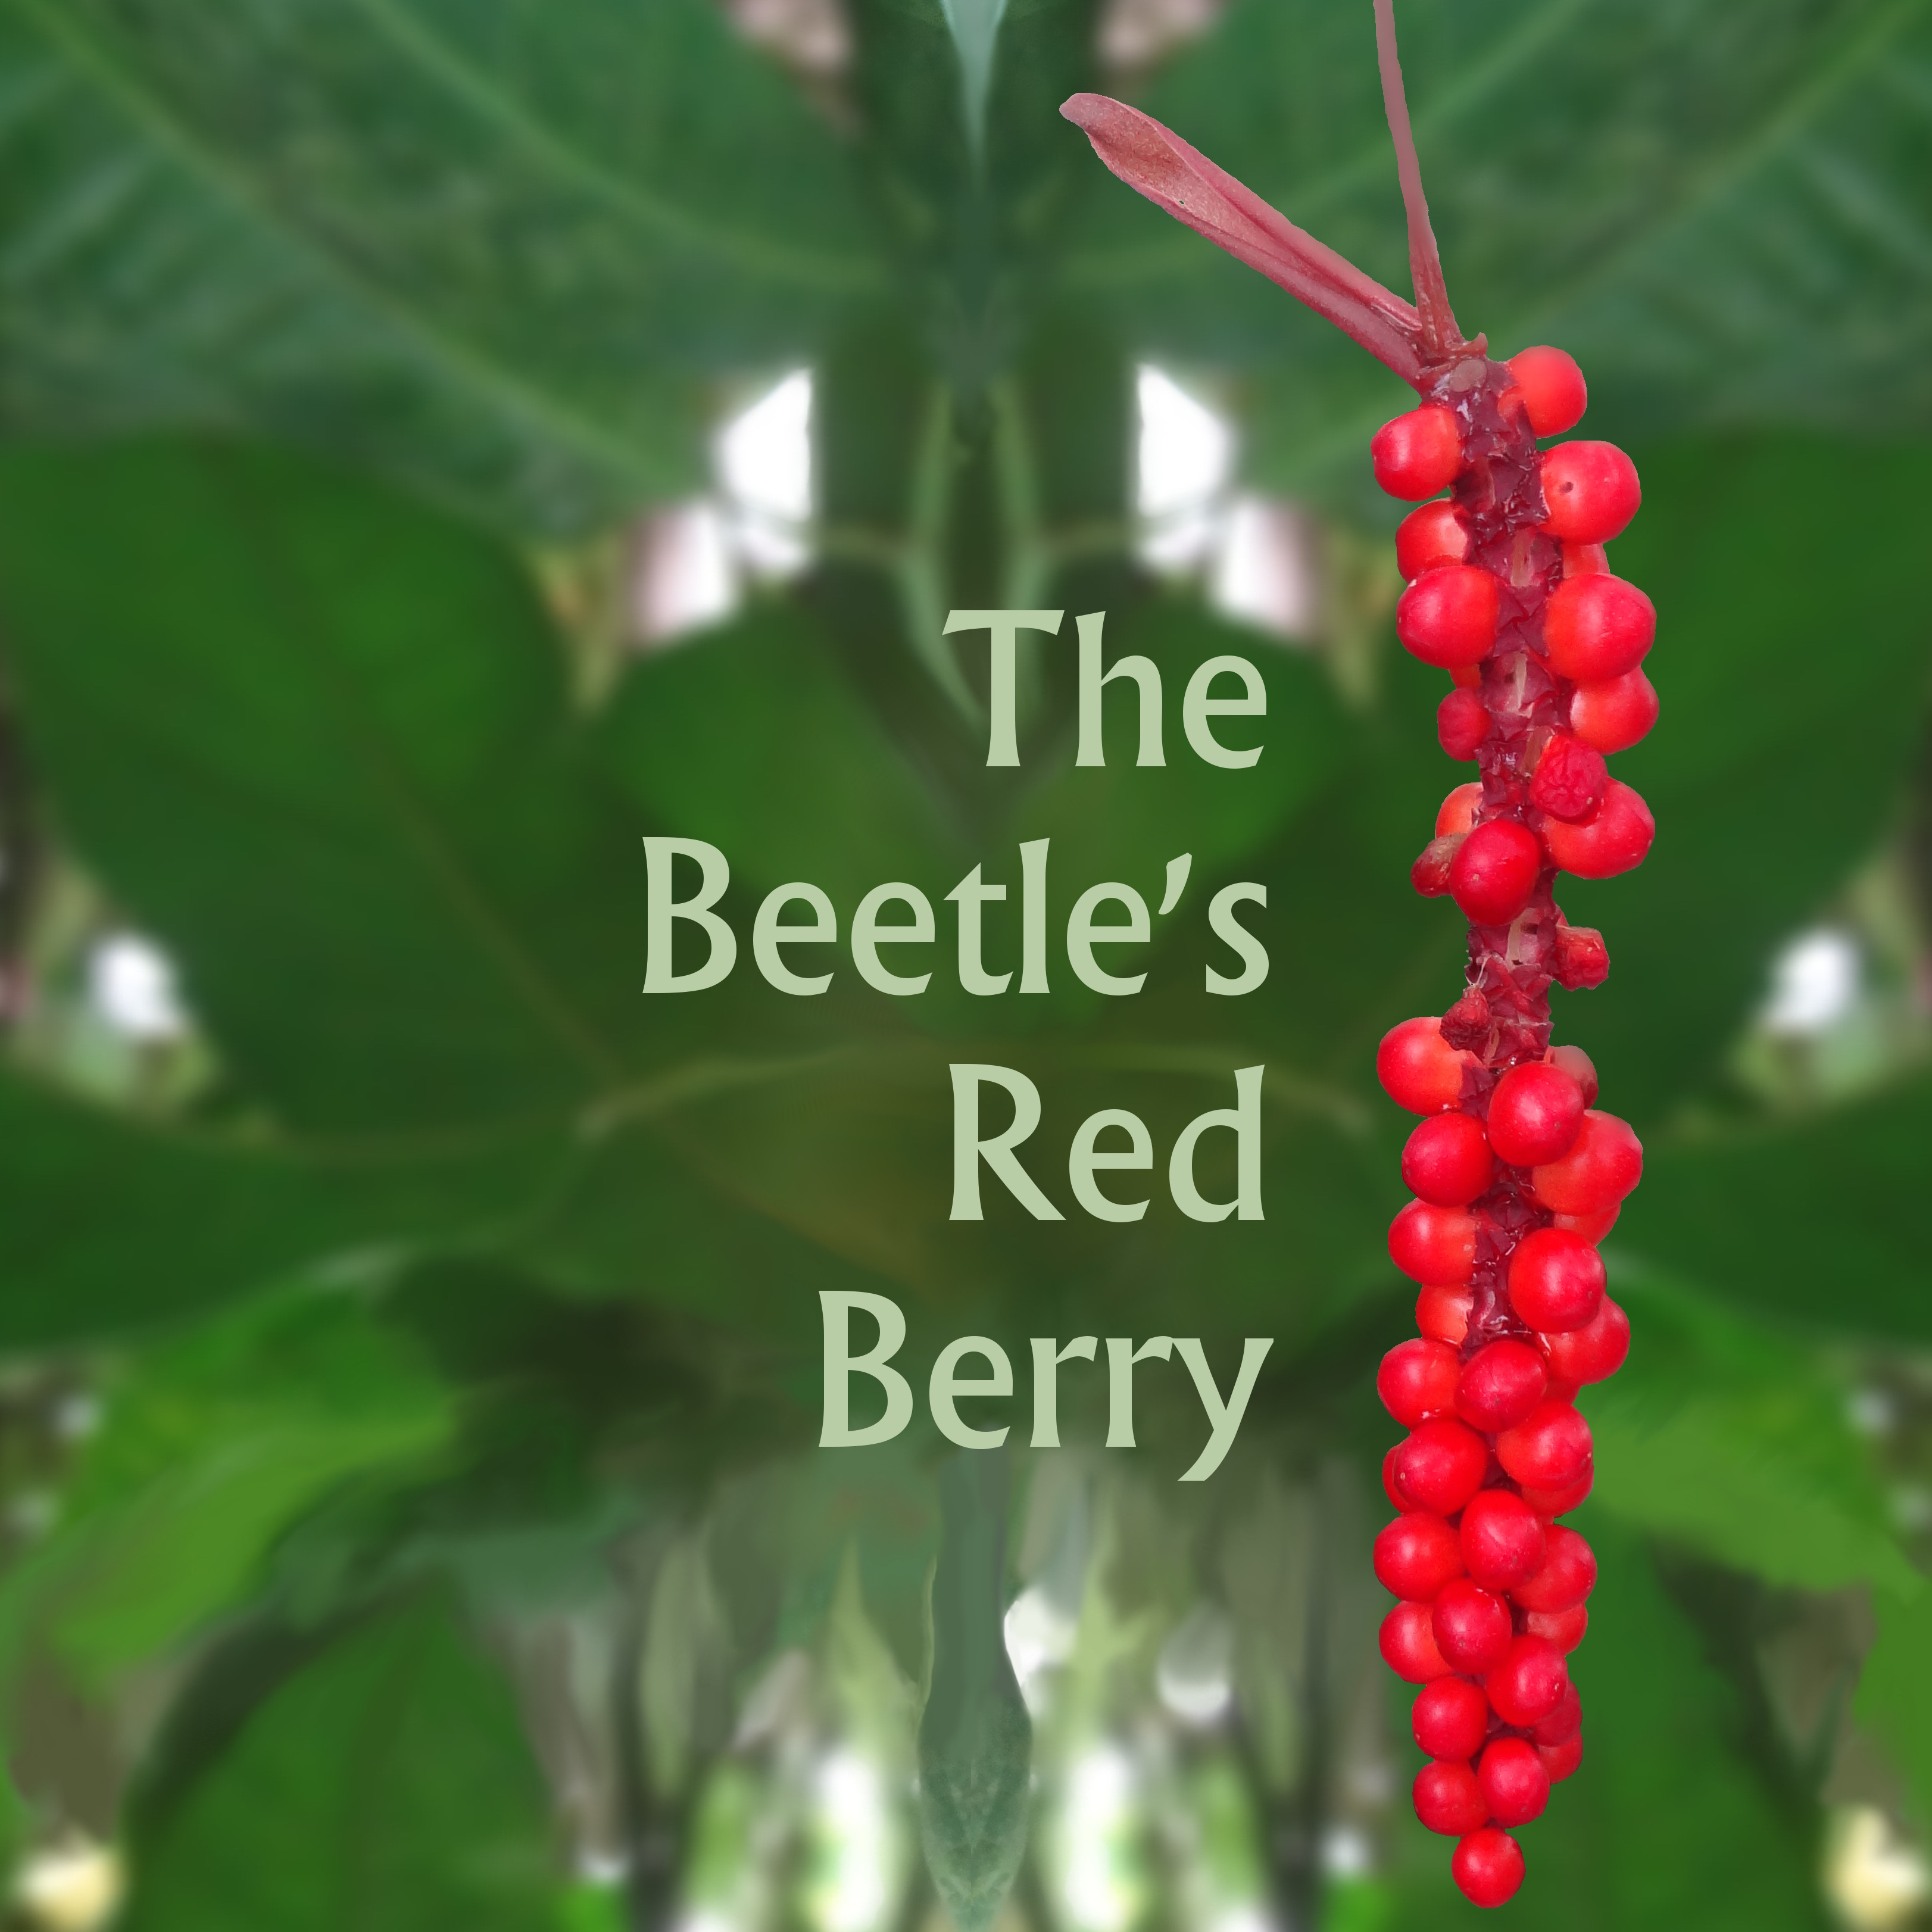 The Beetle's Red Berry